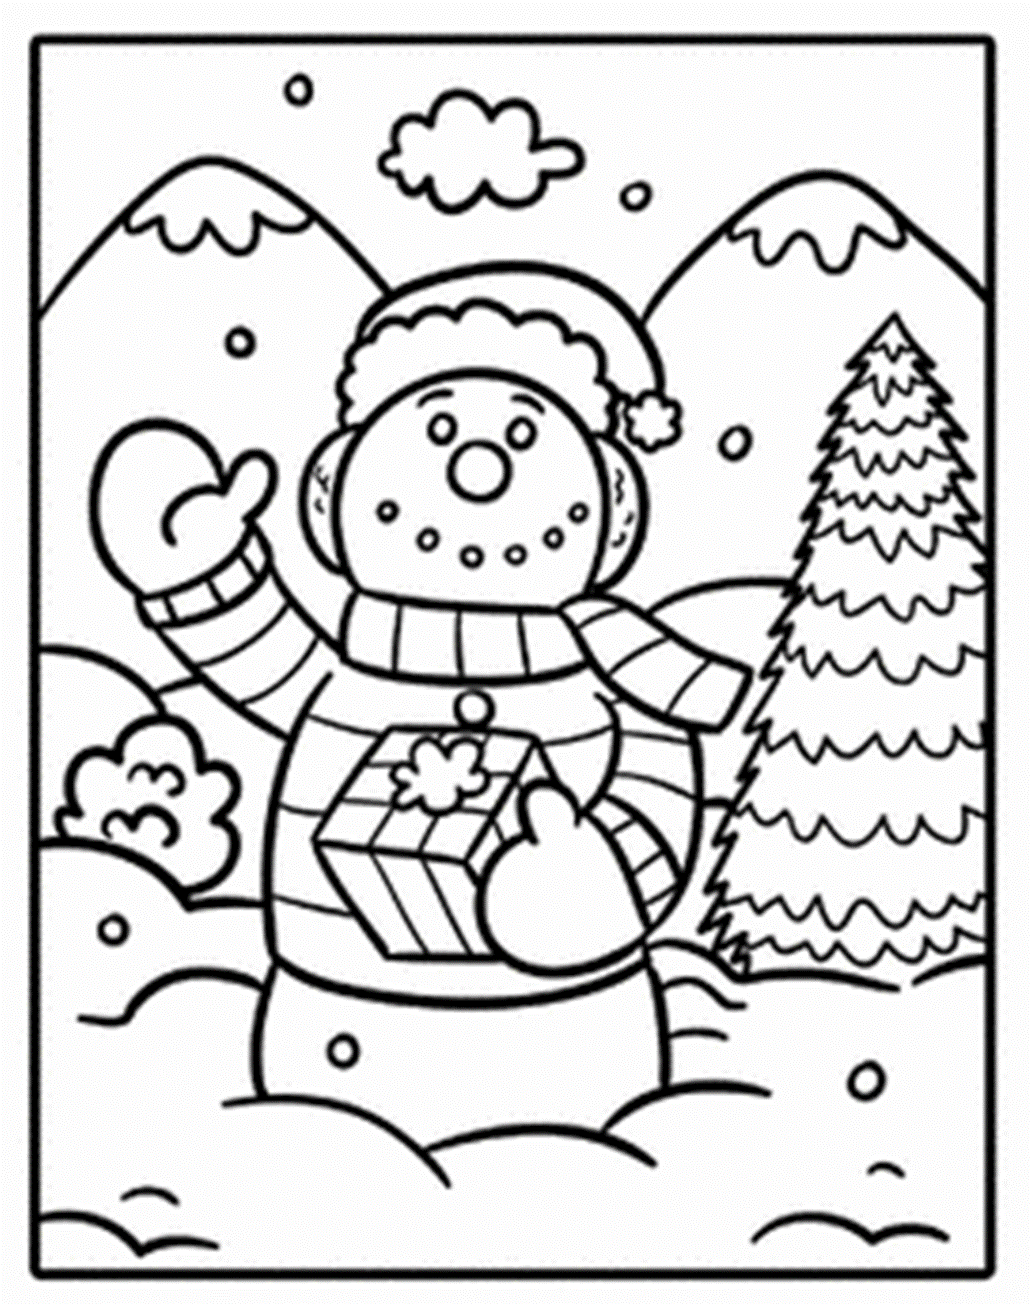 Snowman To Print Coloring Page